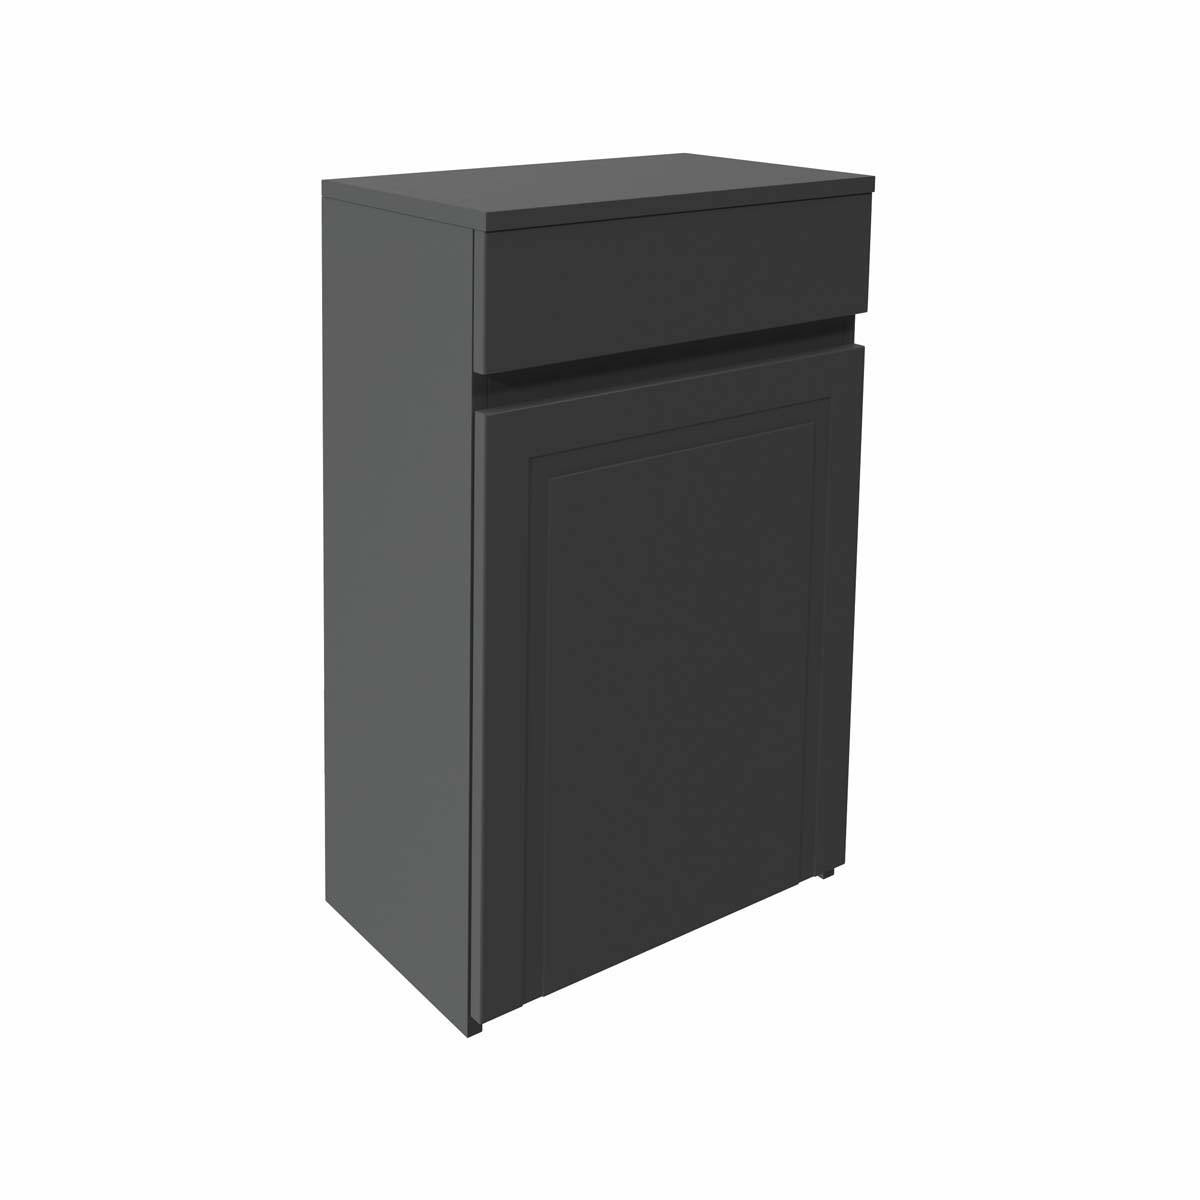 Traditionally 500 WC Unit - Charcoal Grey